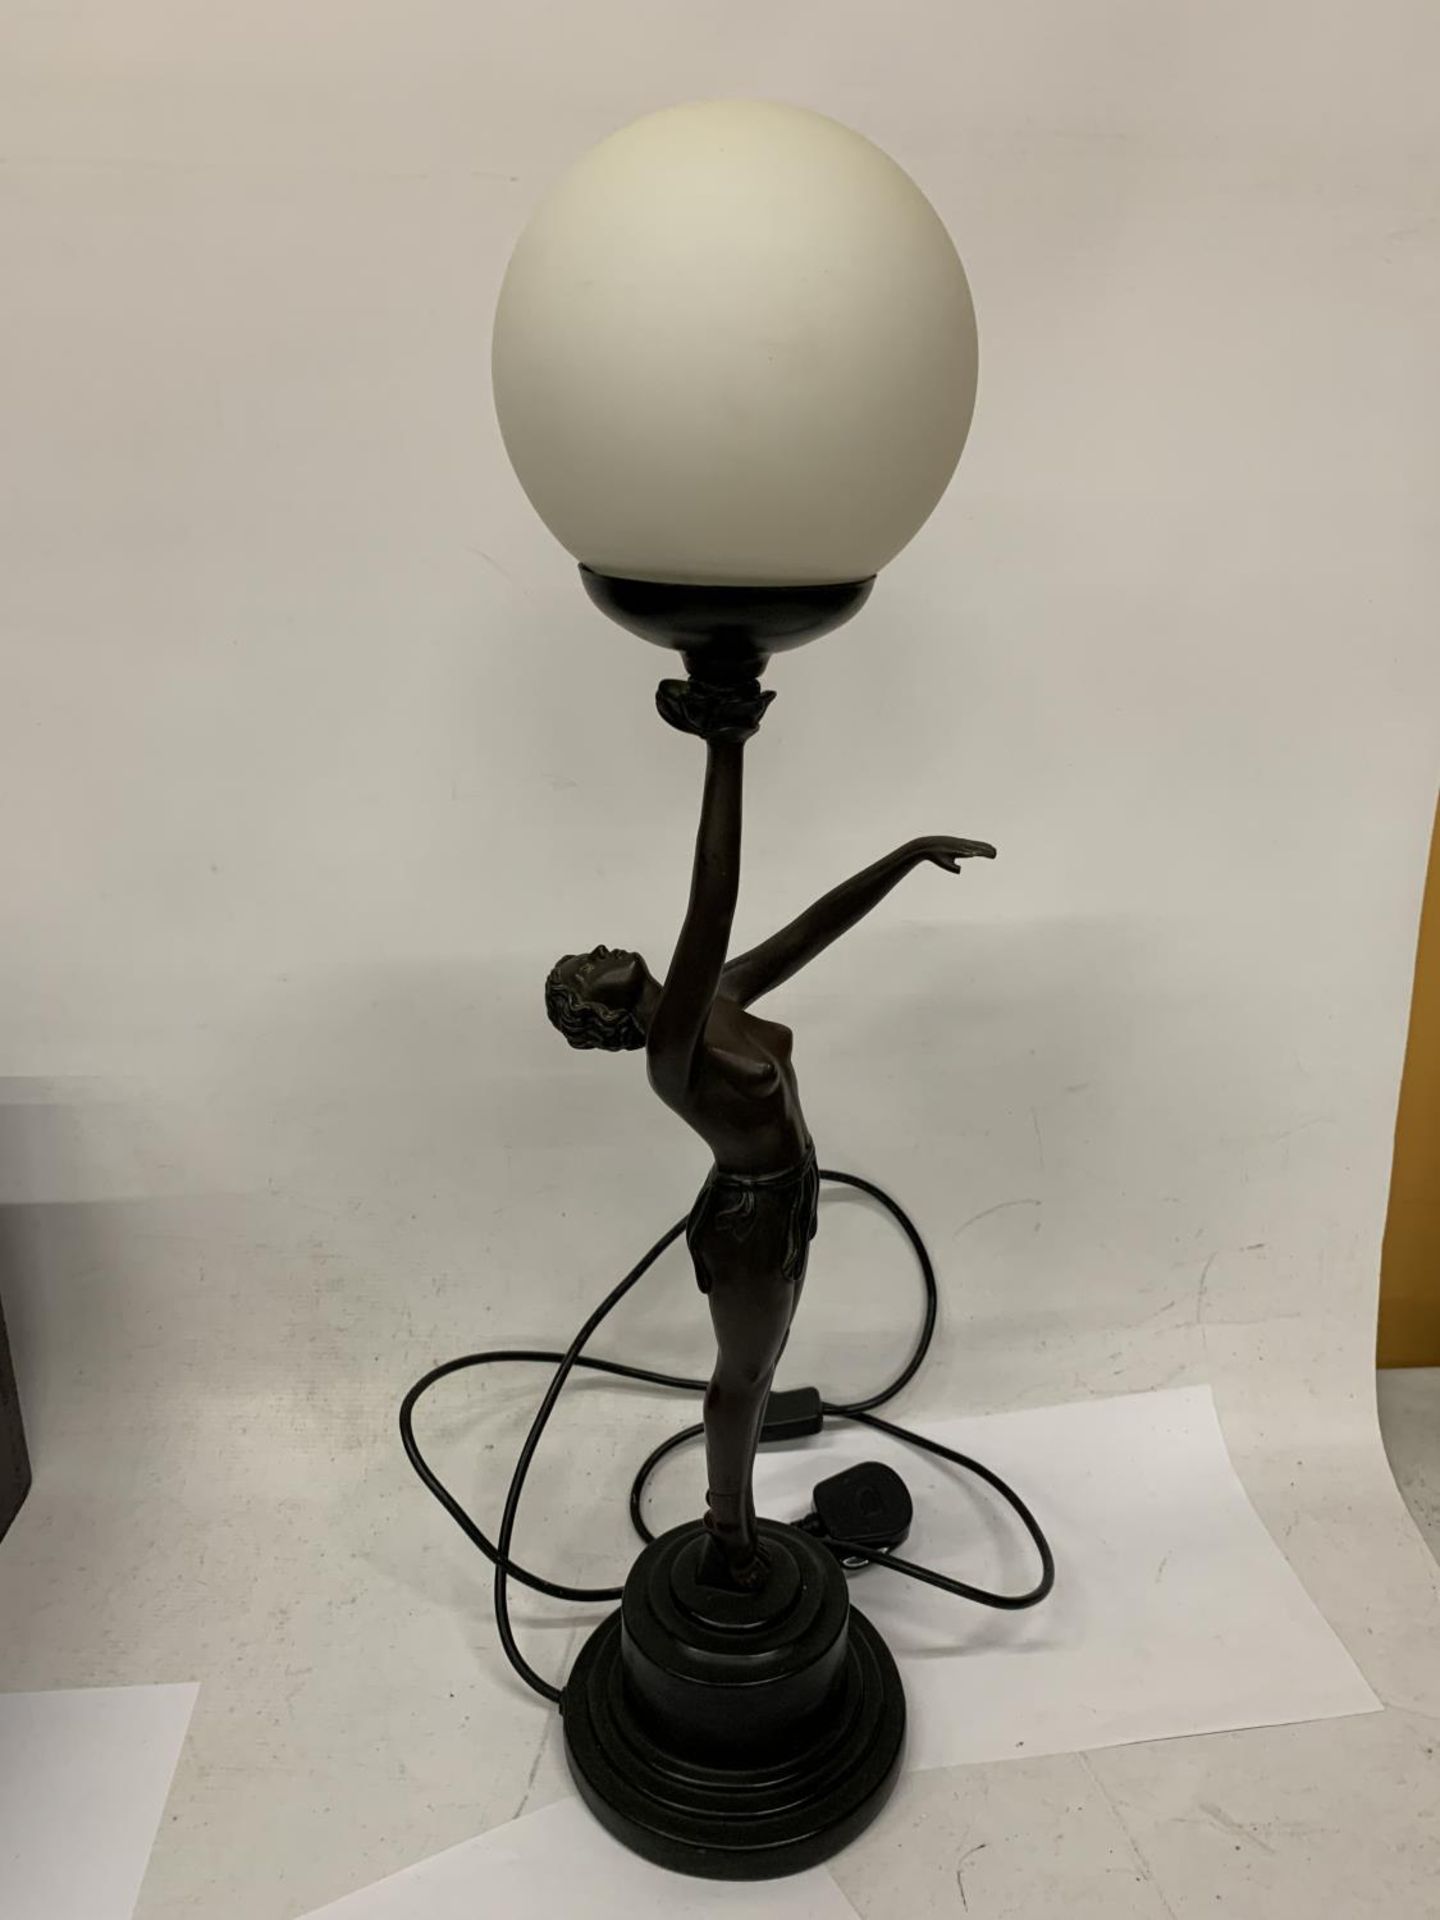 AN ART DECO BRONZE ART LAMP WITH SHADE - "NORA STANDING" - Image 2 of 4